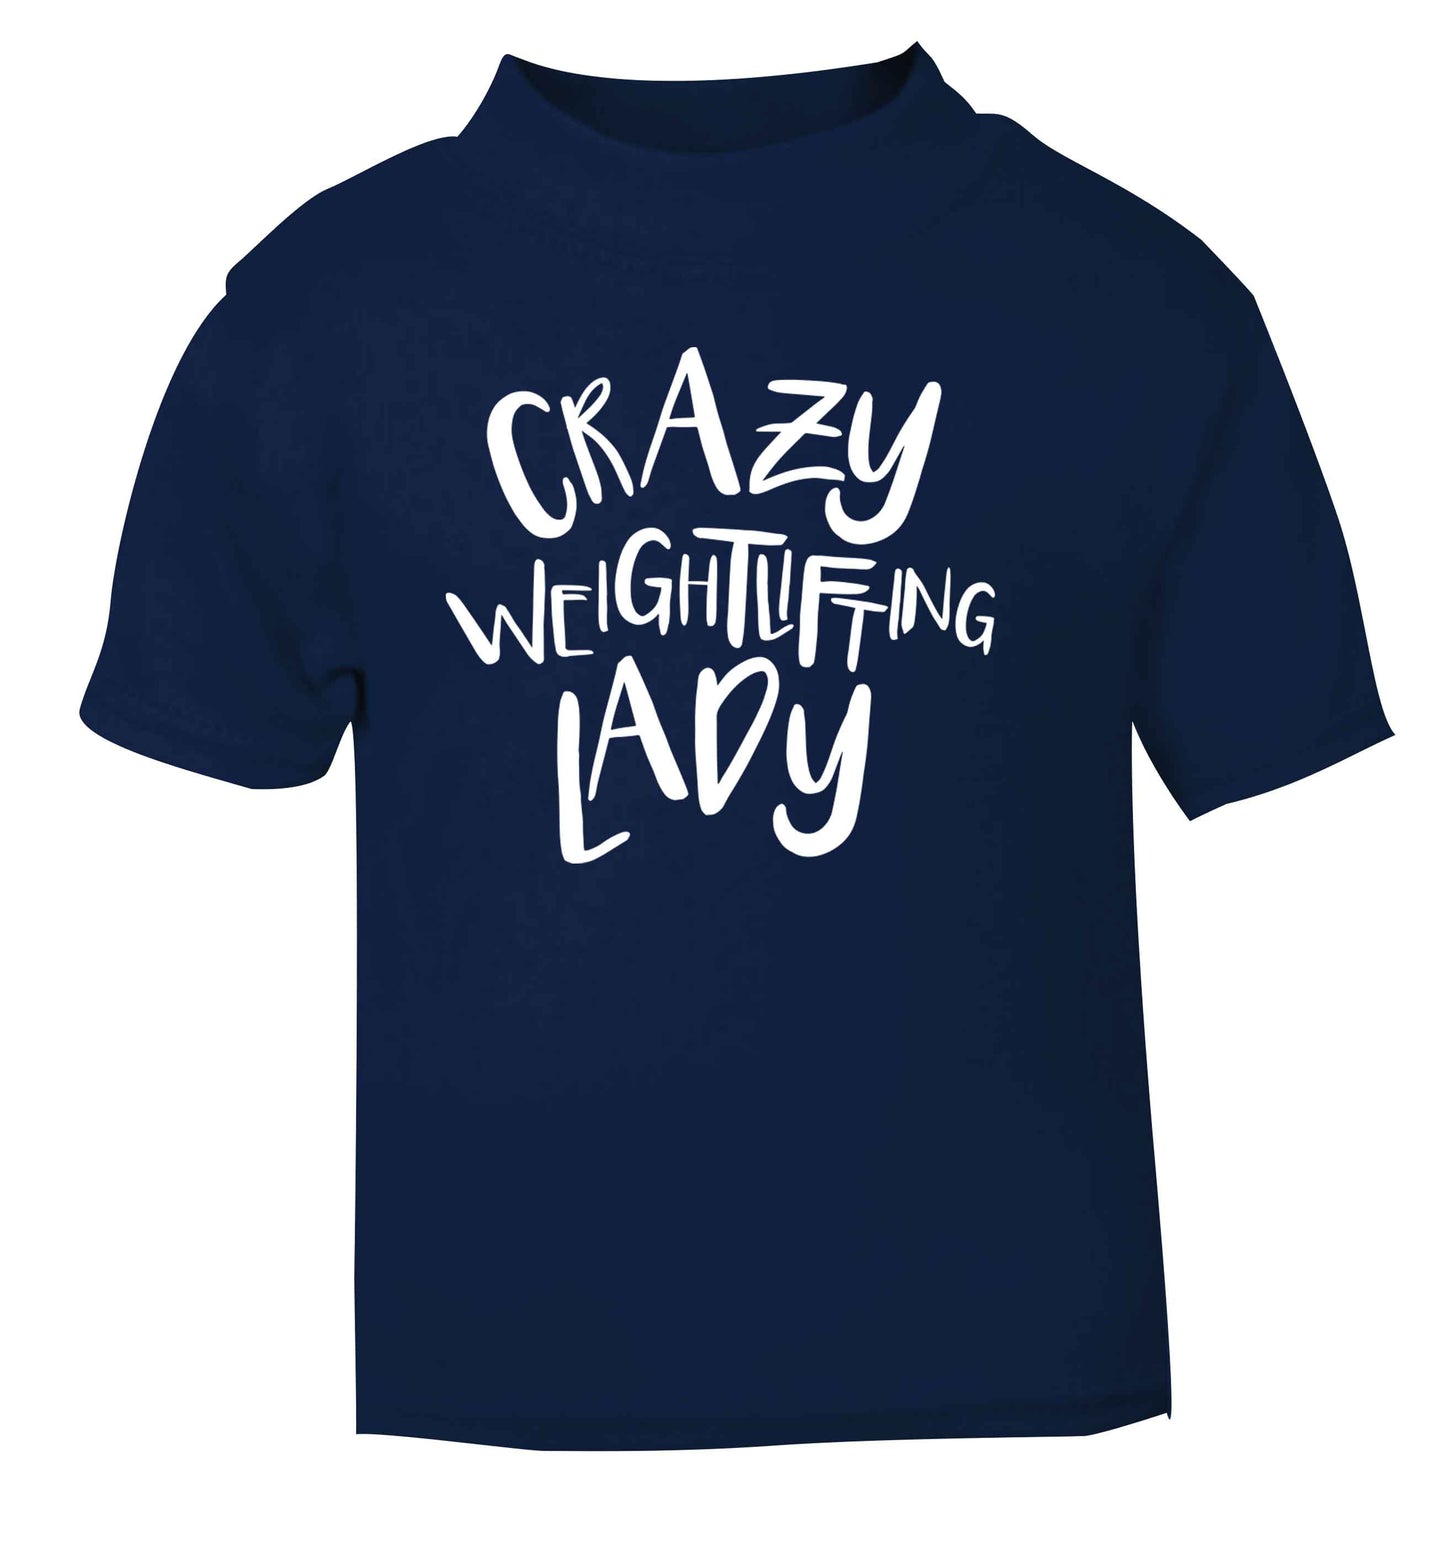 Crazy weightlifting lady navy Baby Toddler Tshirt 2 Years